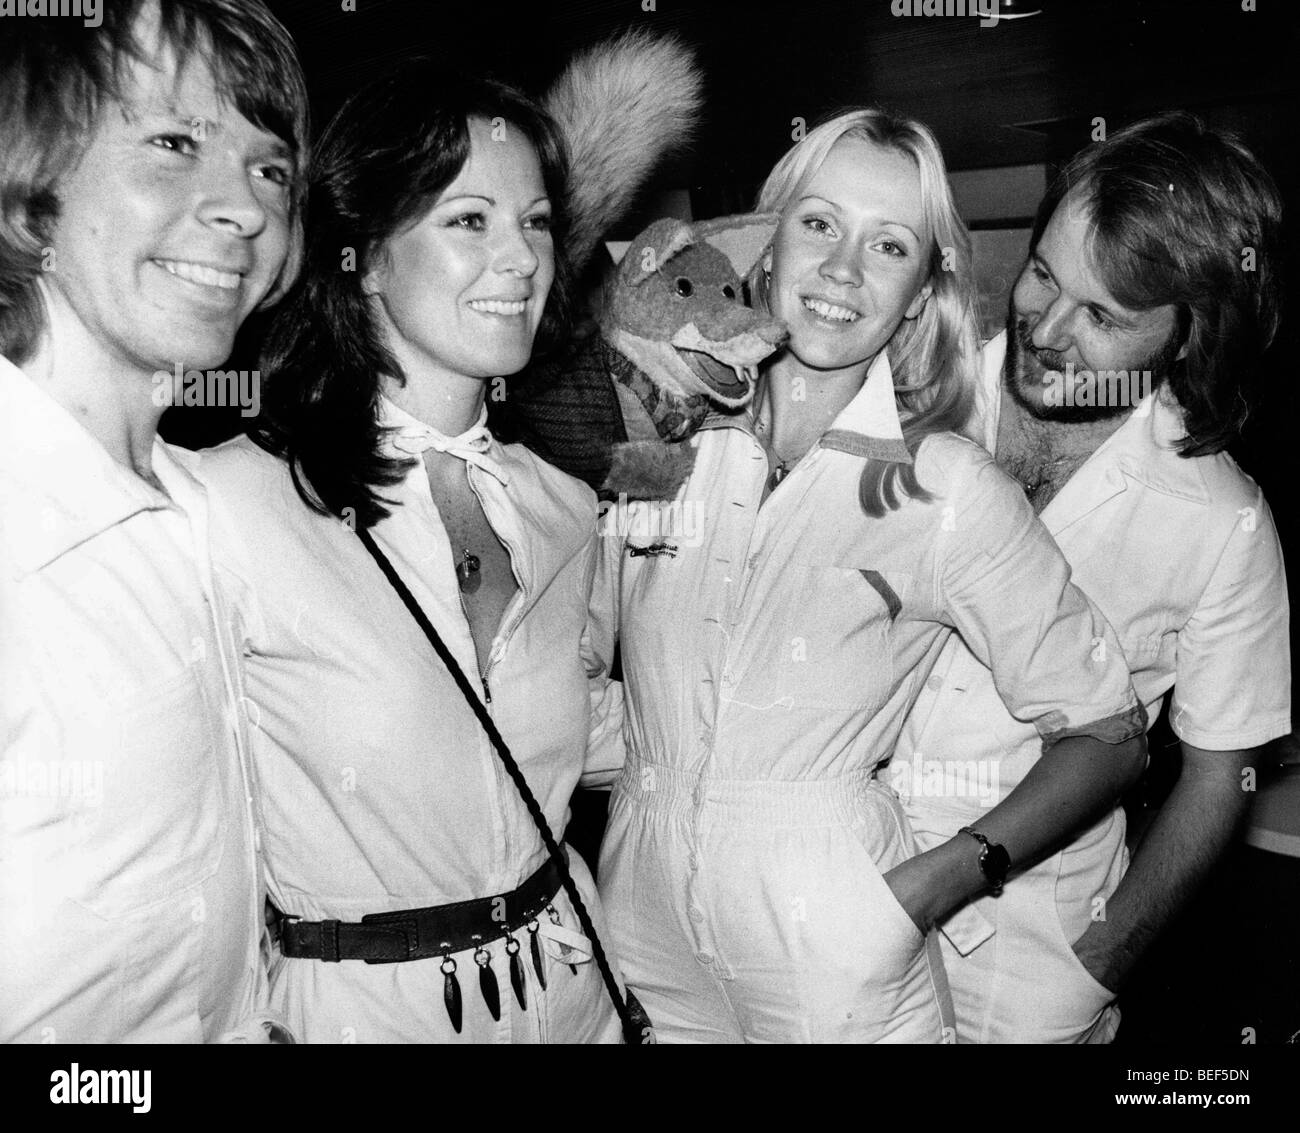 ABBA in white jumpsuits in the mid-1970's (L-R) Björn Ulvaeus, Anni-Frid Lyngstad (Frida), Agnetha Fältskog, and Benny Andersson Stock Photo